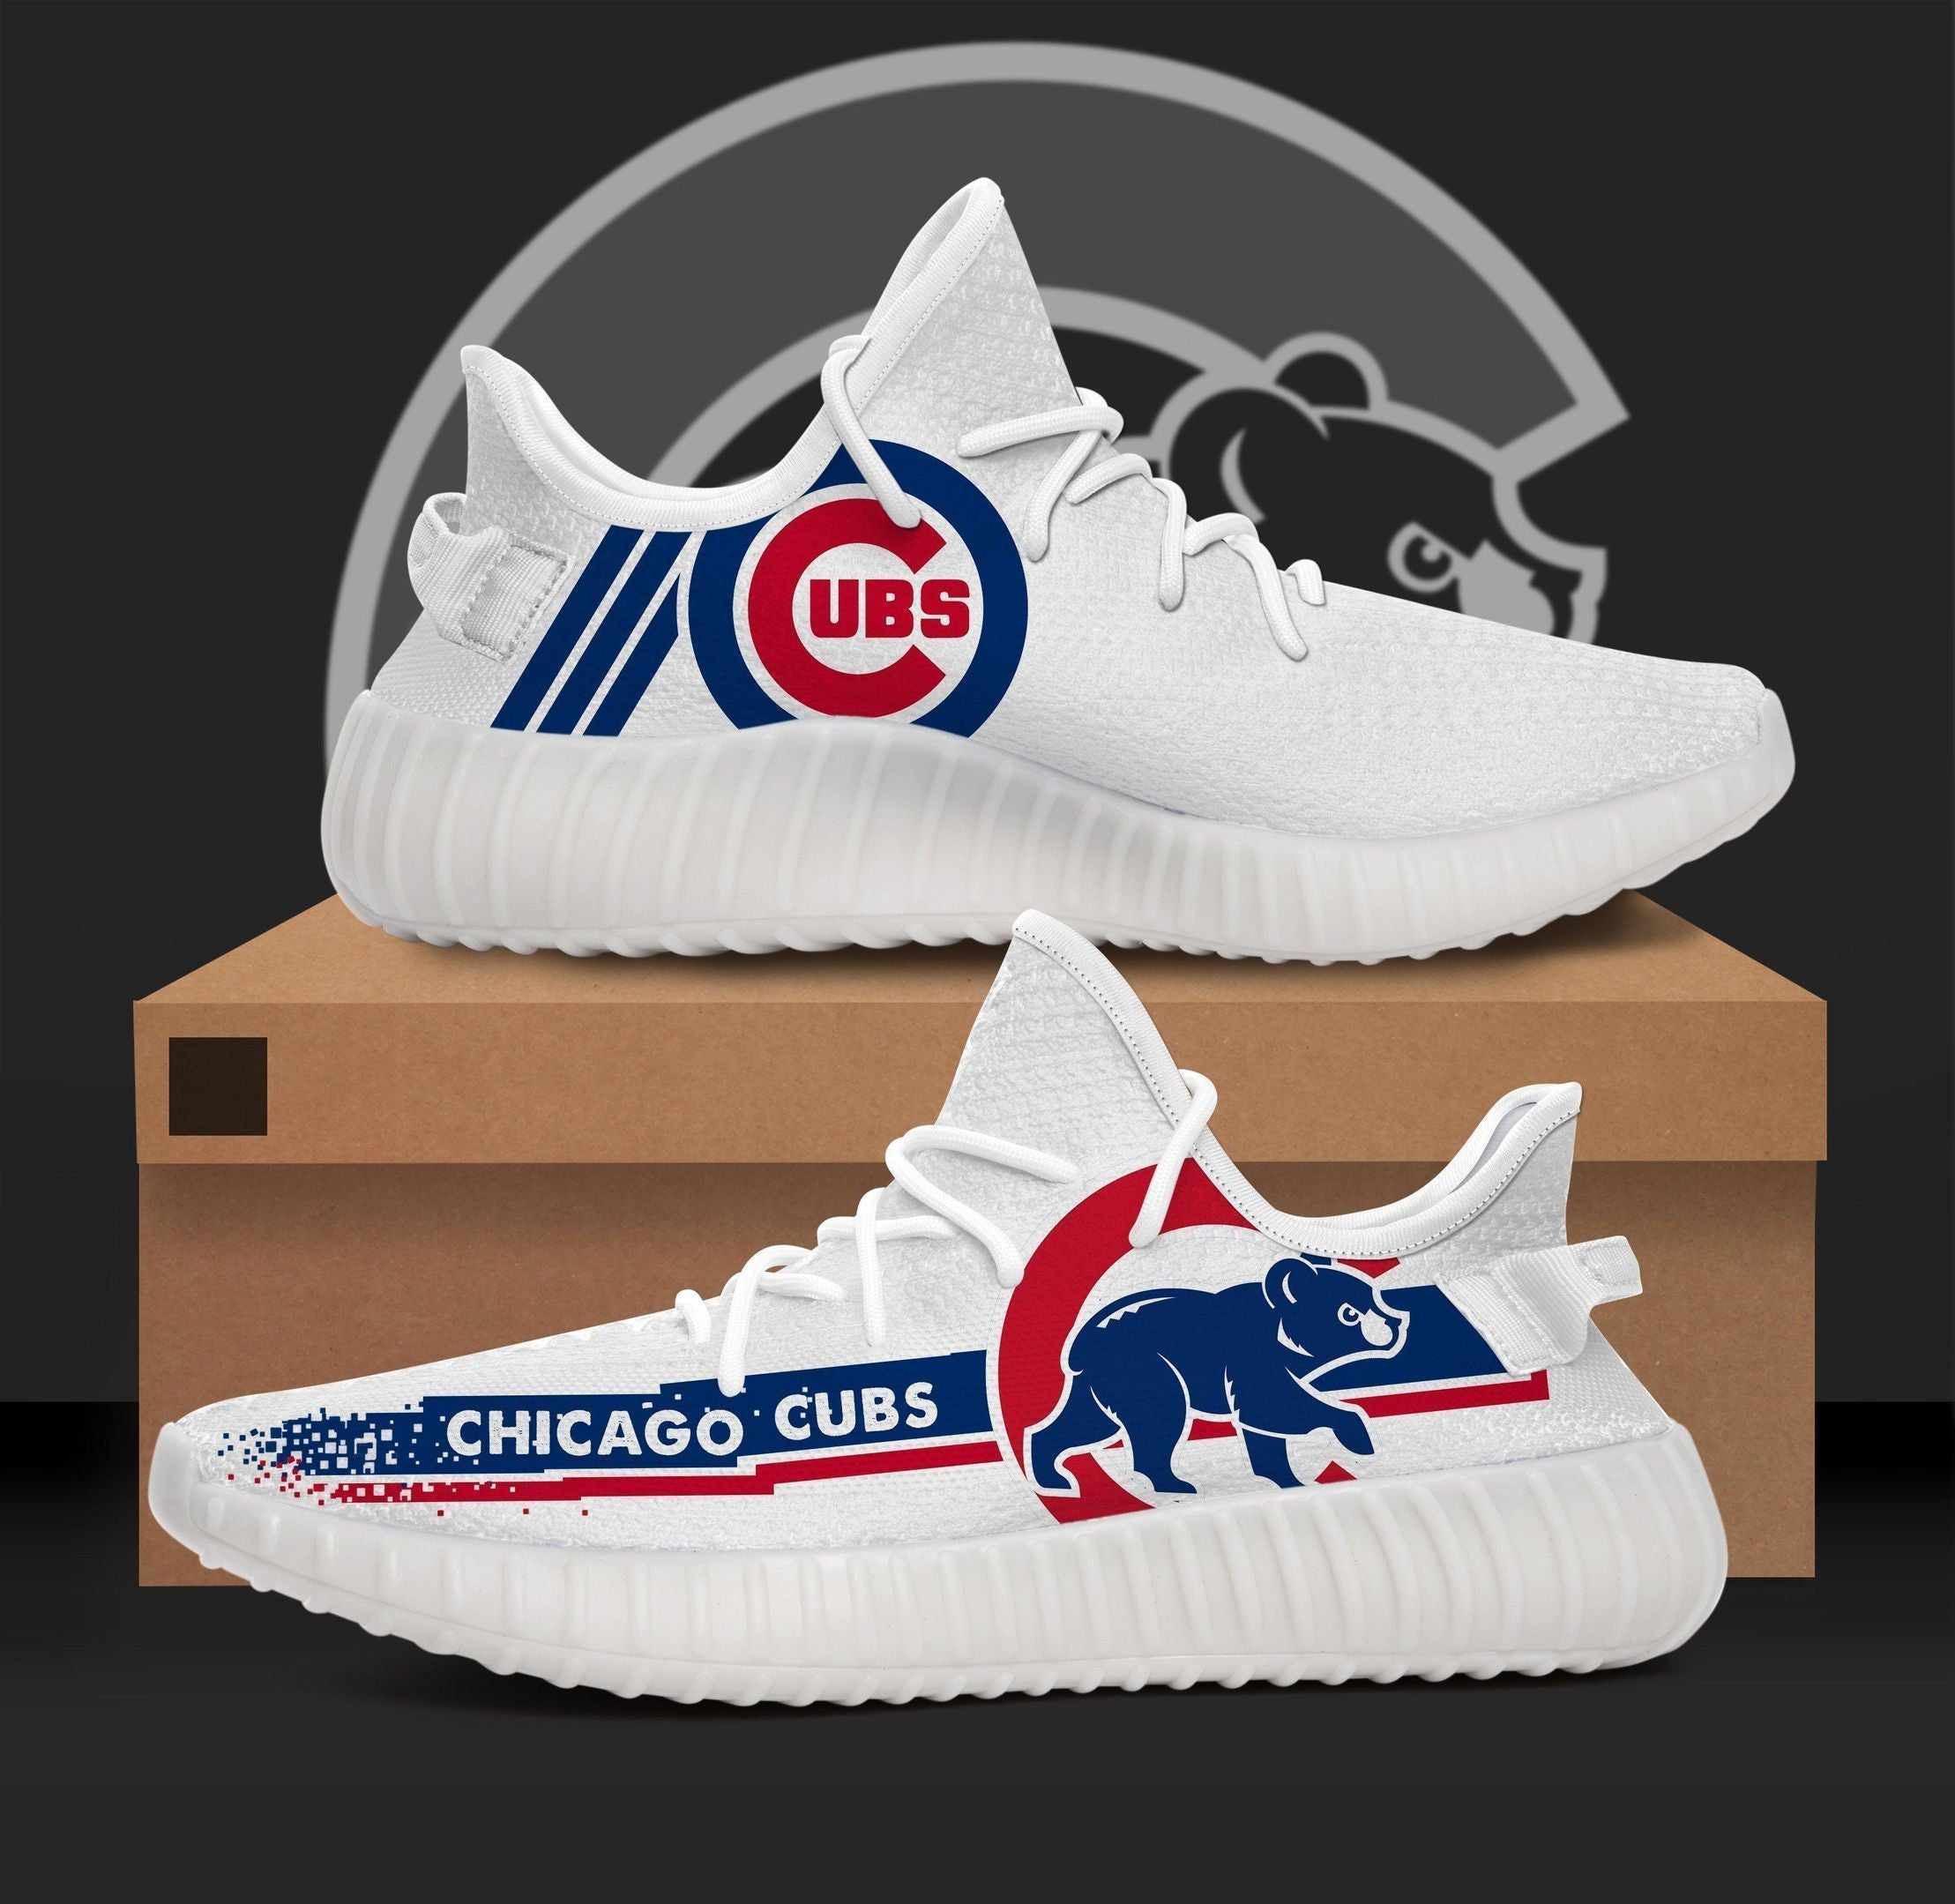 Chicago Cubs Mlb Sport Teams Yeezy Boost 350 V2 Limited Shoes Custom Shoes